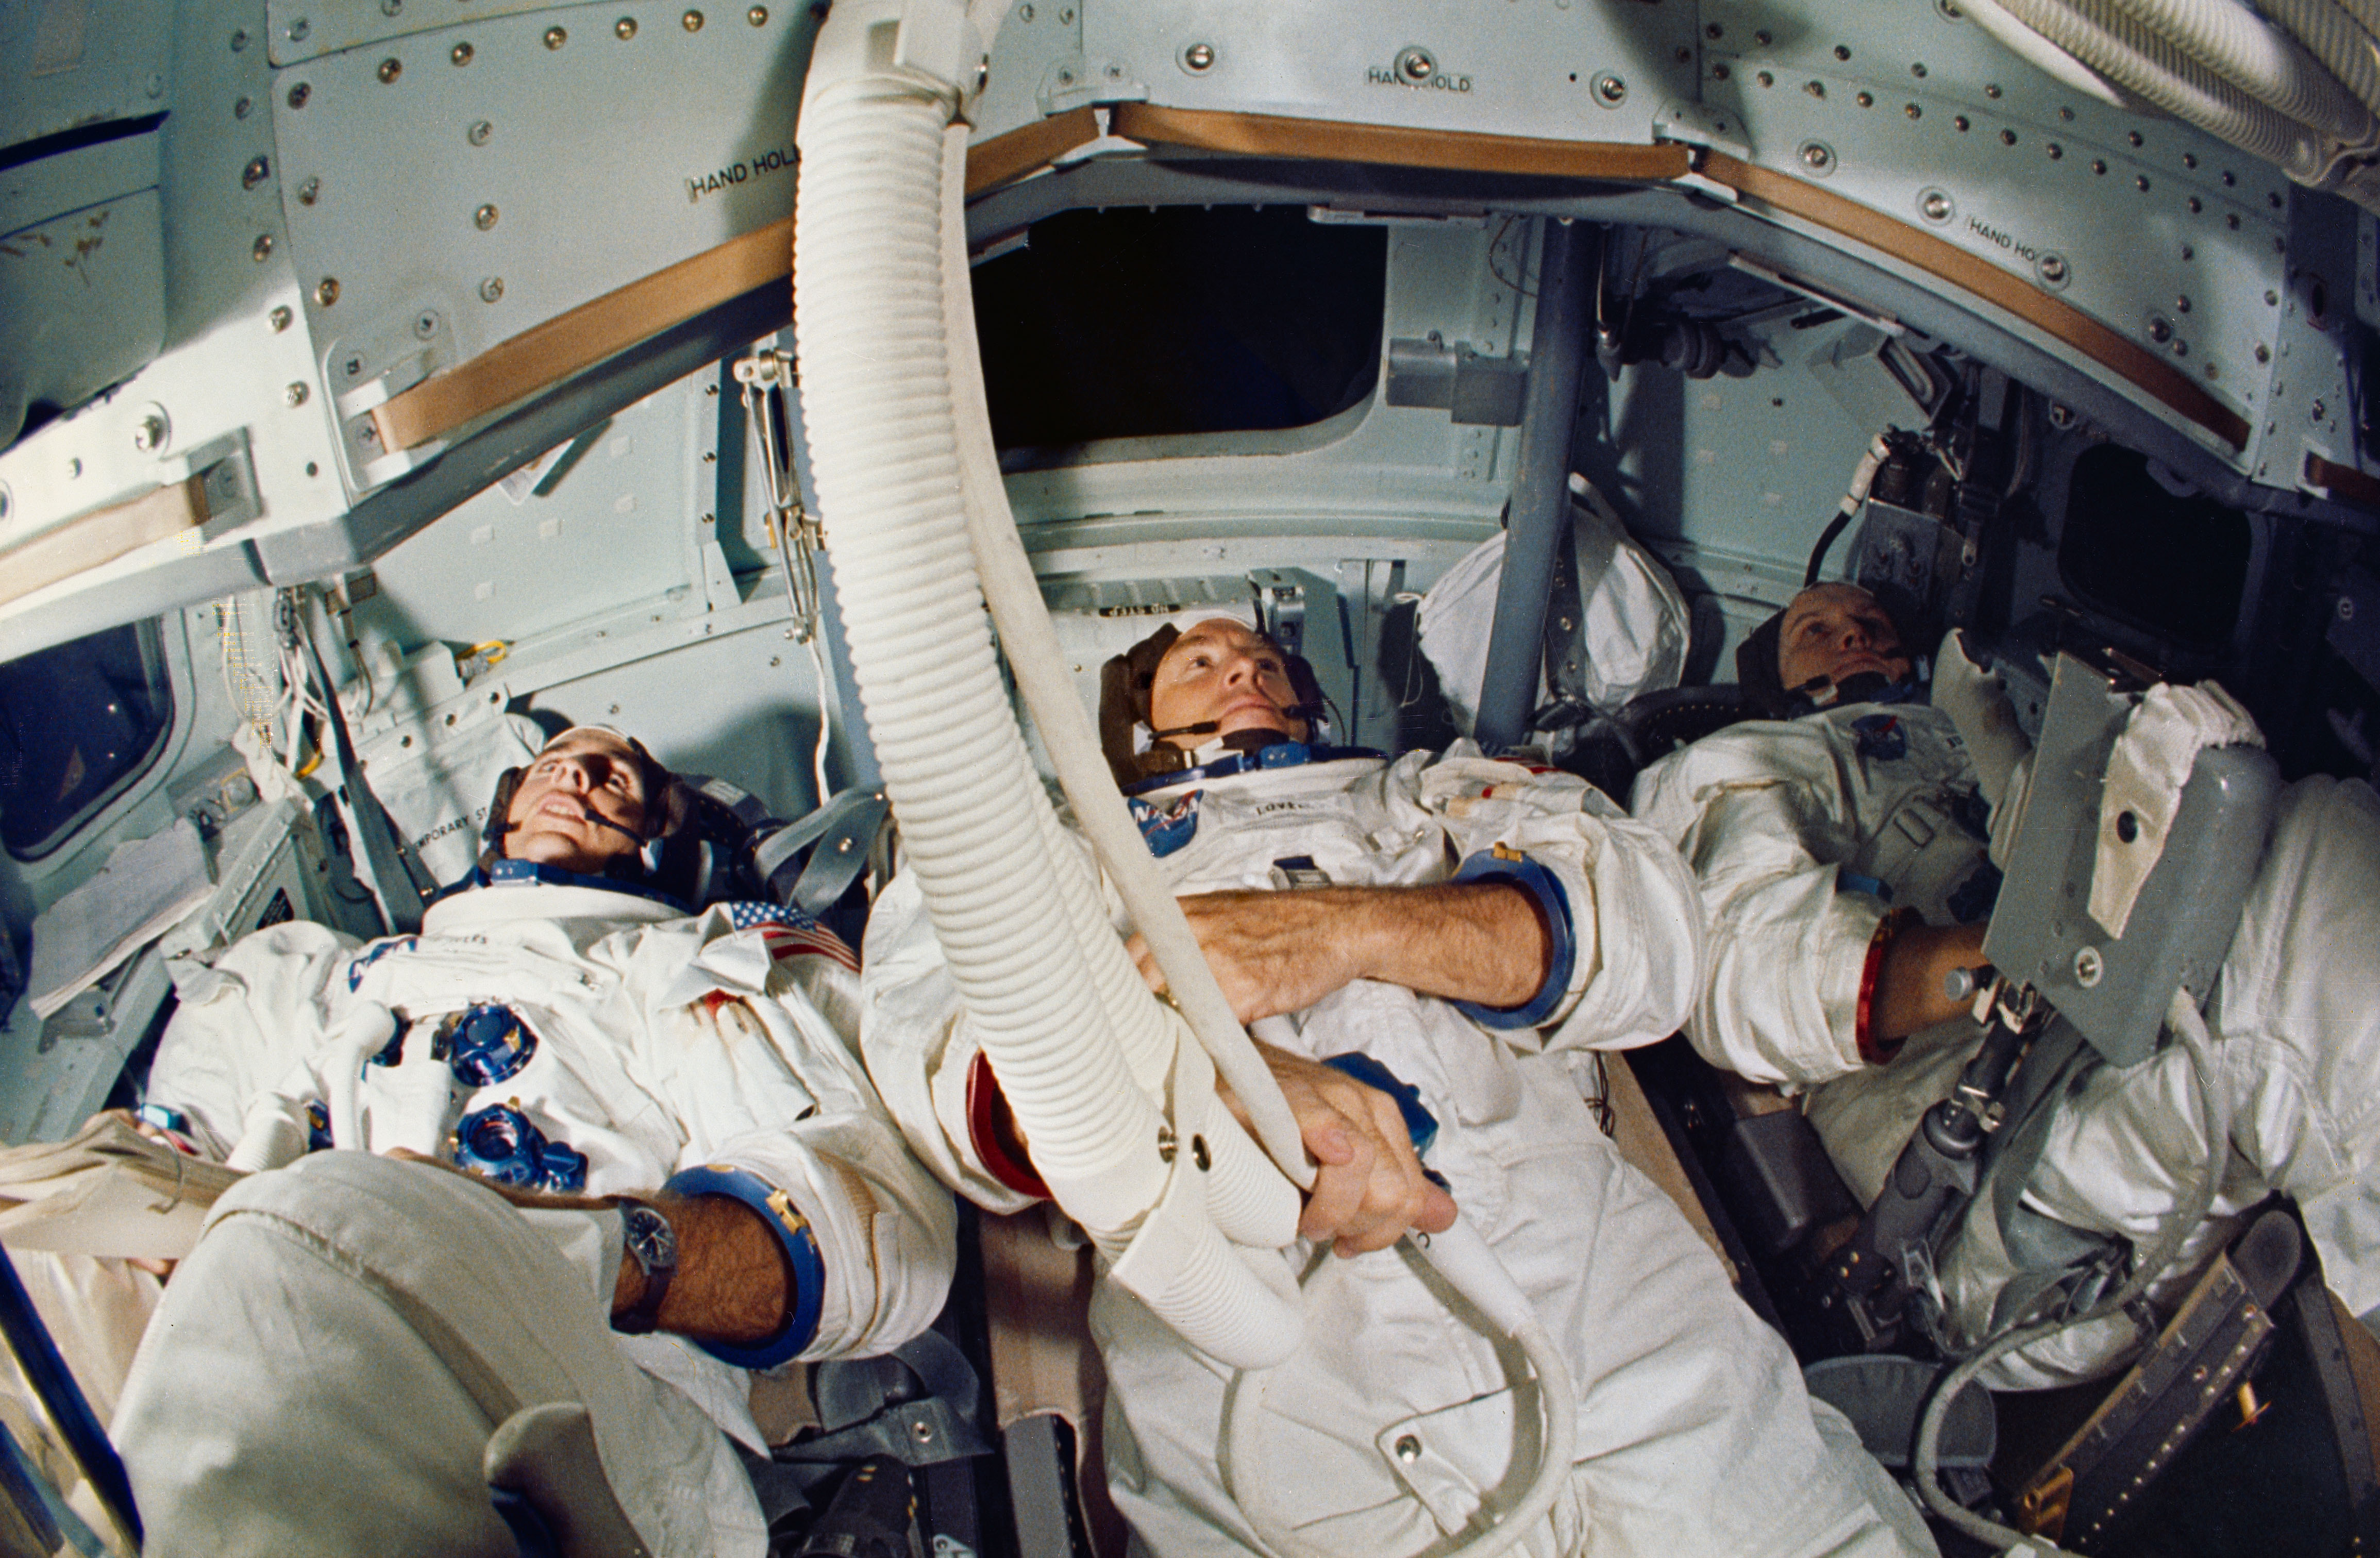 Apollo 8 prime crew of (left to right) Anders, Lovell, and Borman in the CM mission simulator at KSC